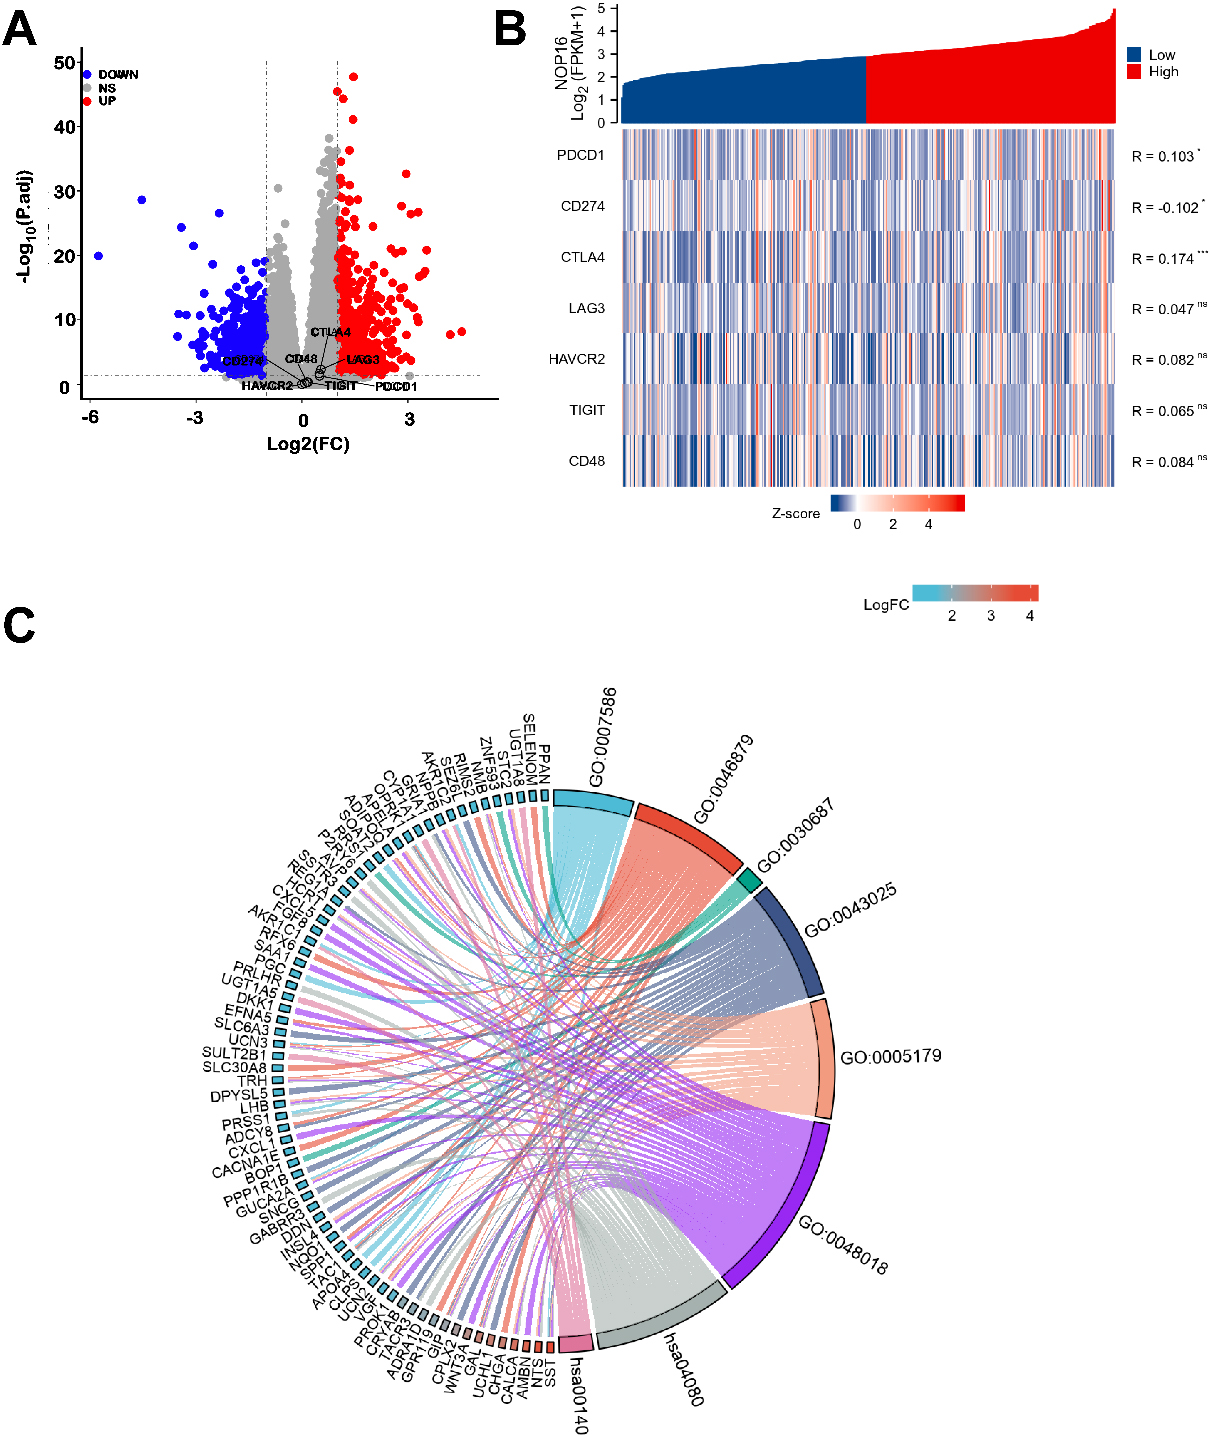 NOP16-related differentially expressed genes (DEGs) and functional enrichment analysis of NOP16 in glioma using GO and KEGG. (A) Volcano plot of DEGs. Blue and red dots indicate the significantly downregulated and upregulated DEGs, respectively. (B) Heatmap of the coexpression of NOP16 and immune-related genes. (C) GO and KEGG analysis of DEGs. (GO, Gene Ontology; KEGG, Kyoto Encyclopedia of Genes and Genomes; DEGs, differentially expressed genes. p*< 0.05, p**< 0.01, and p*⁣**< 0.001.)